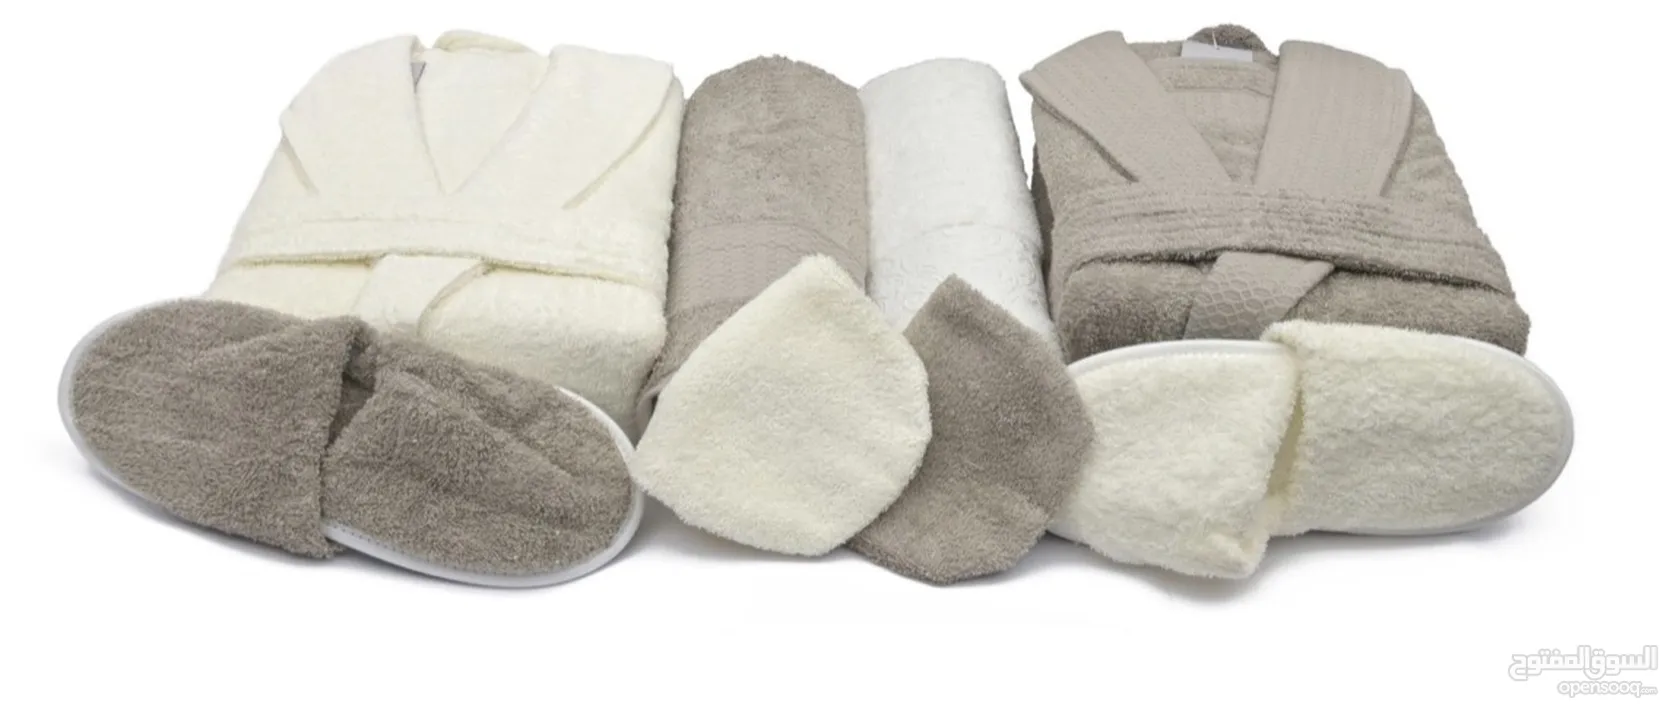 Egyptian cotton Bath towels & Bathrobe and kitchen towels for sale.